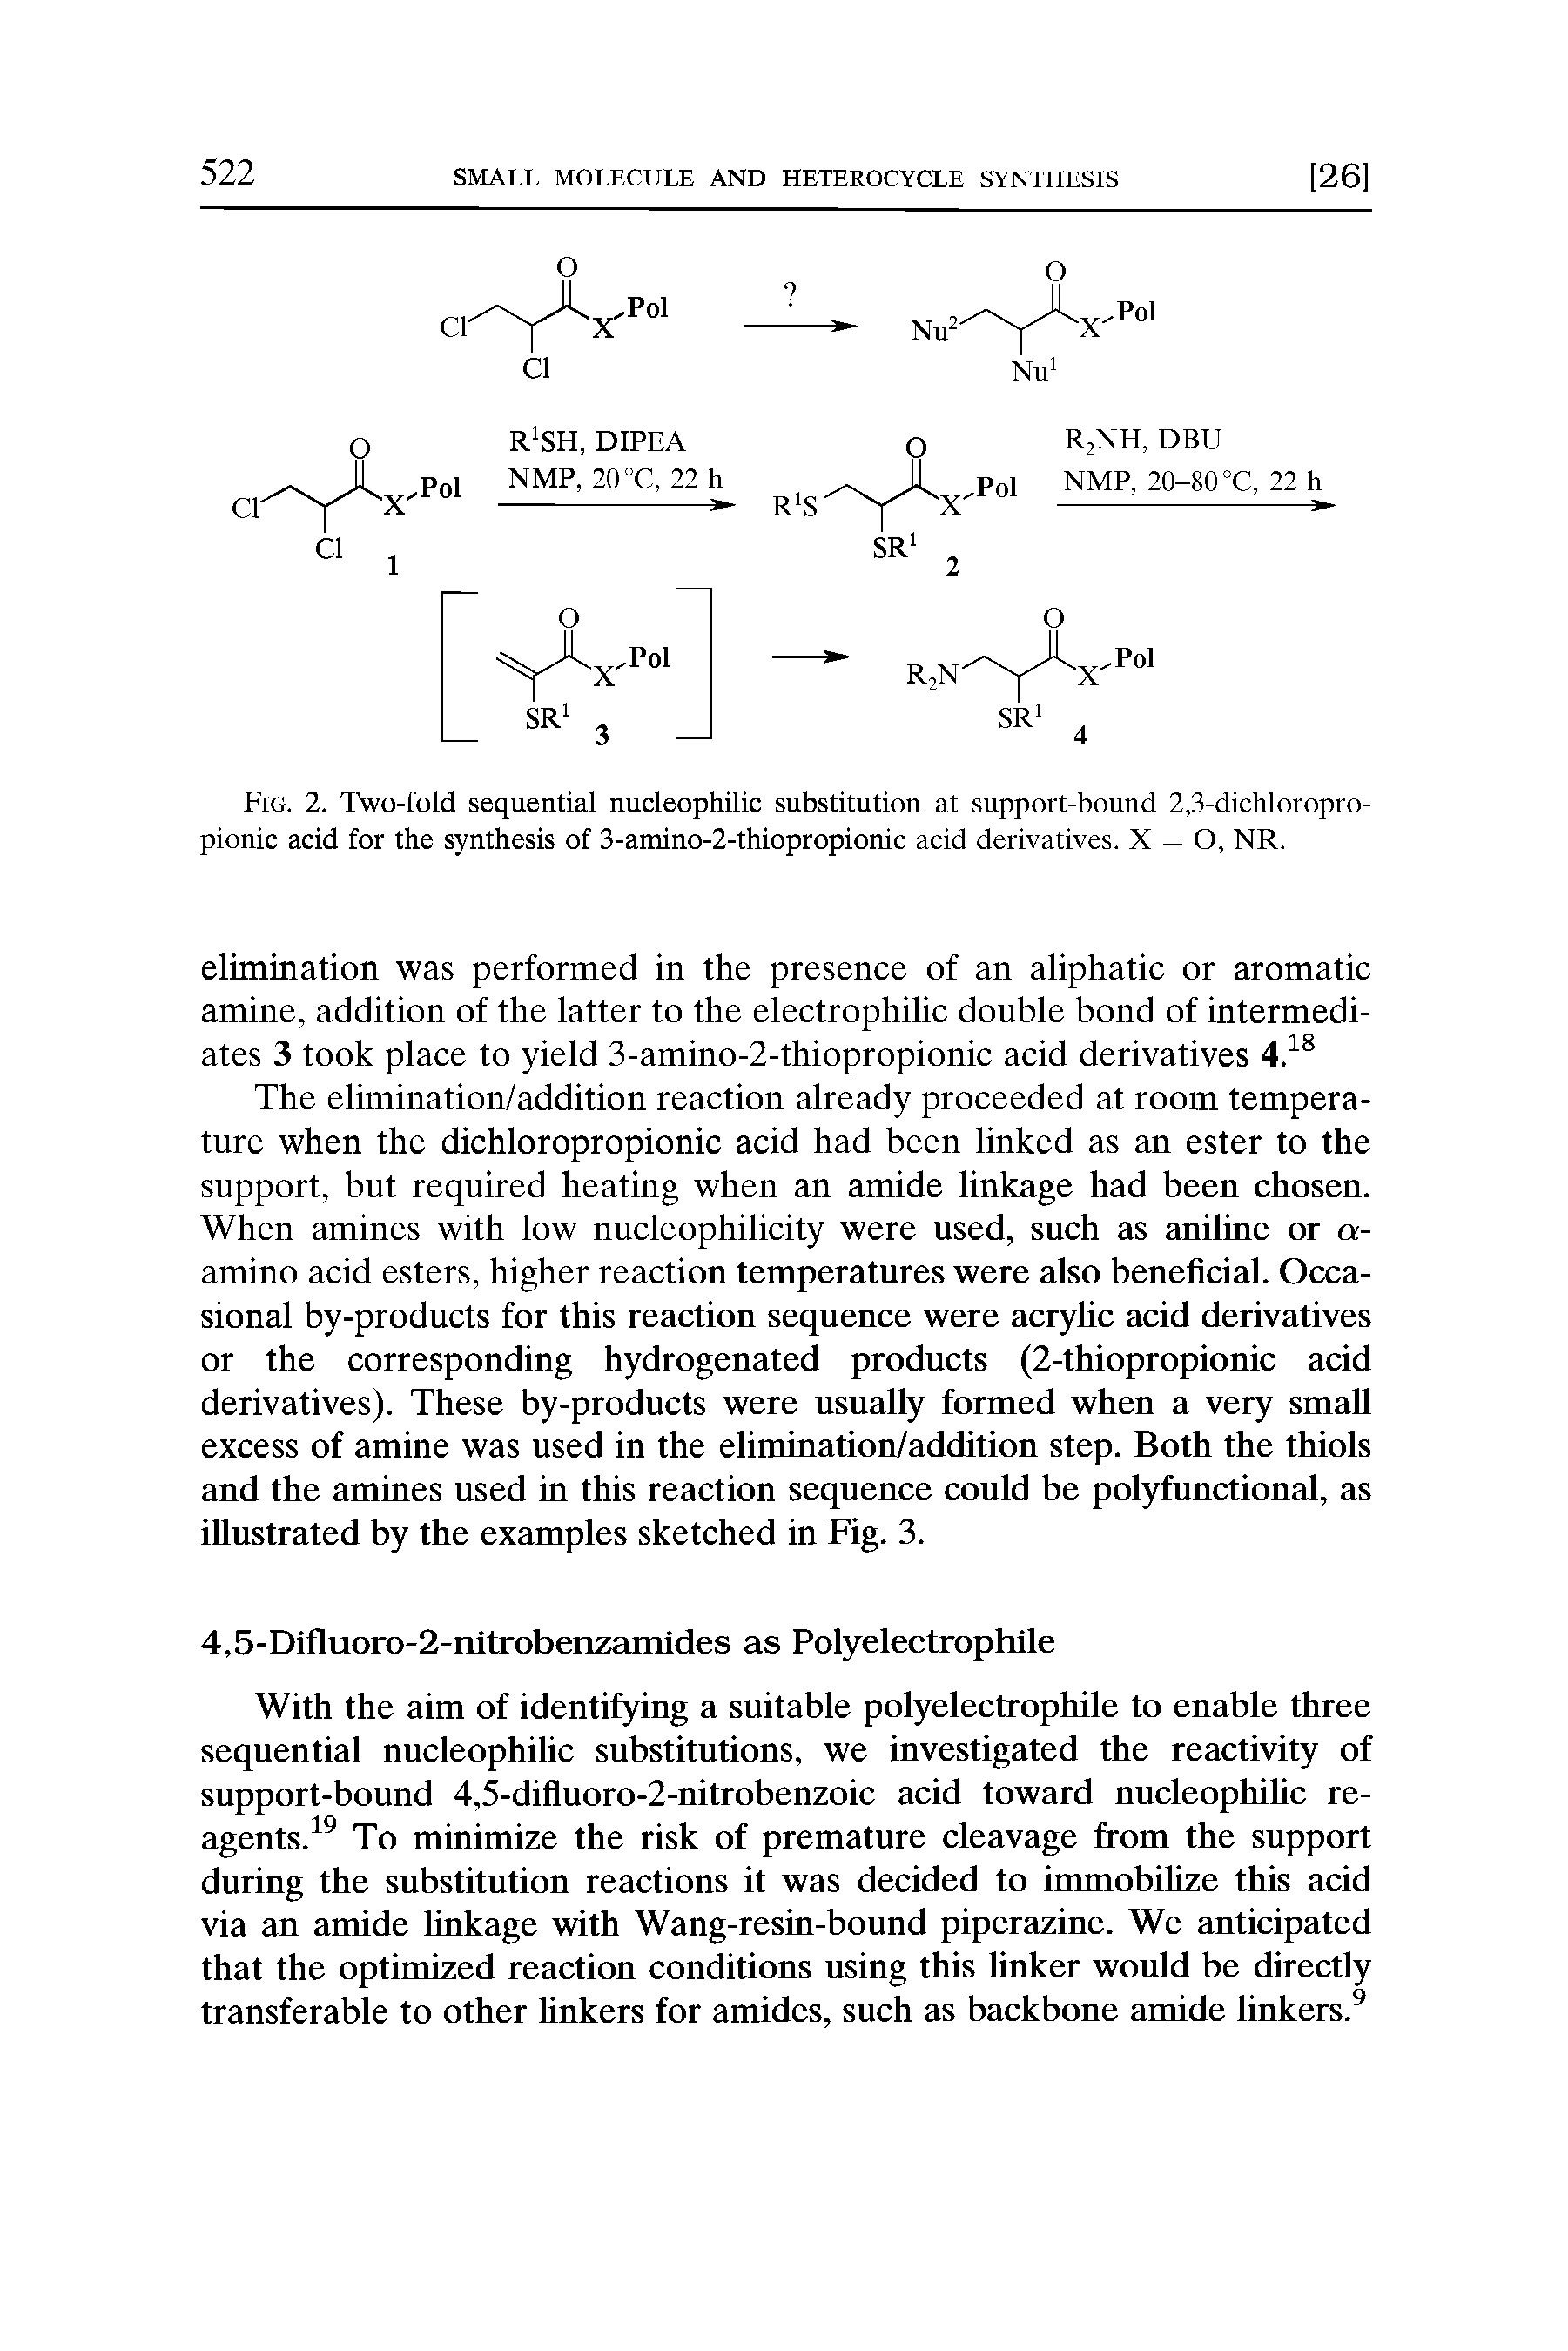 Fig. 2. Two-fold sequential nucleophilic substitution at support-bound 2,3-dichloropro-pionic acid for the synthesis of 3-amino-2-thiopropionic acid derivatives. X = O, NR.